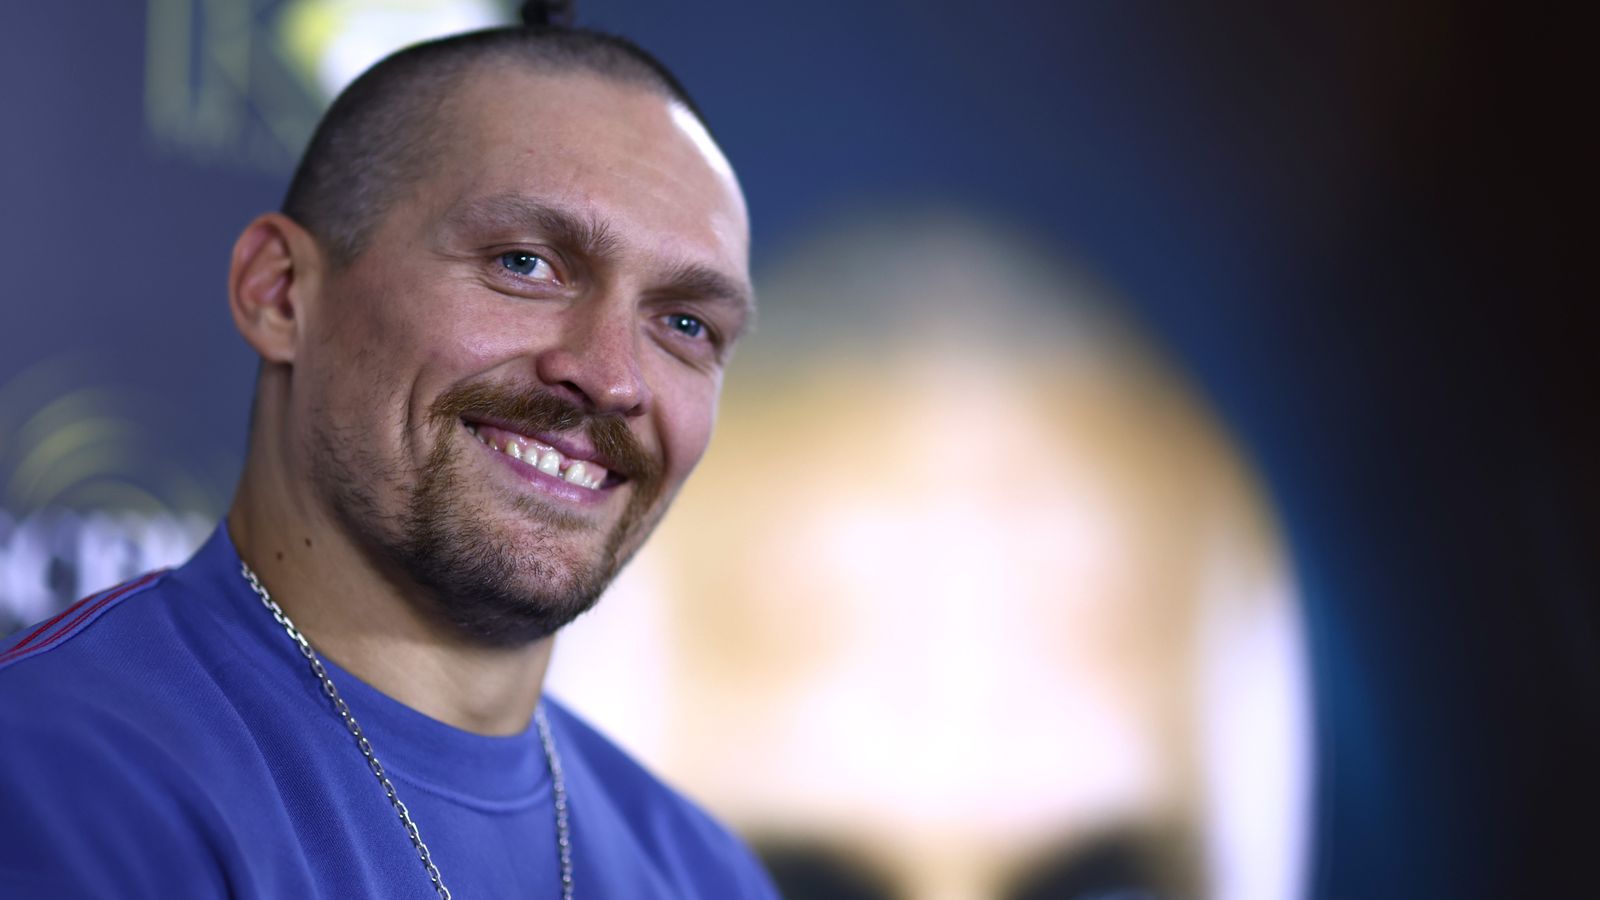 Peter Fury always knew Oleksandr Usyk was the ‘real deal’ as he prepares for Anthony Joshua rematch